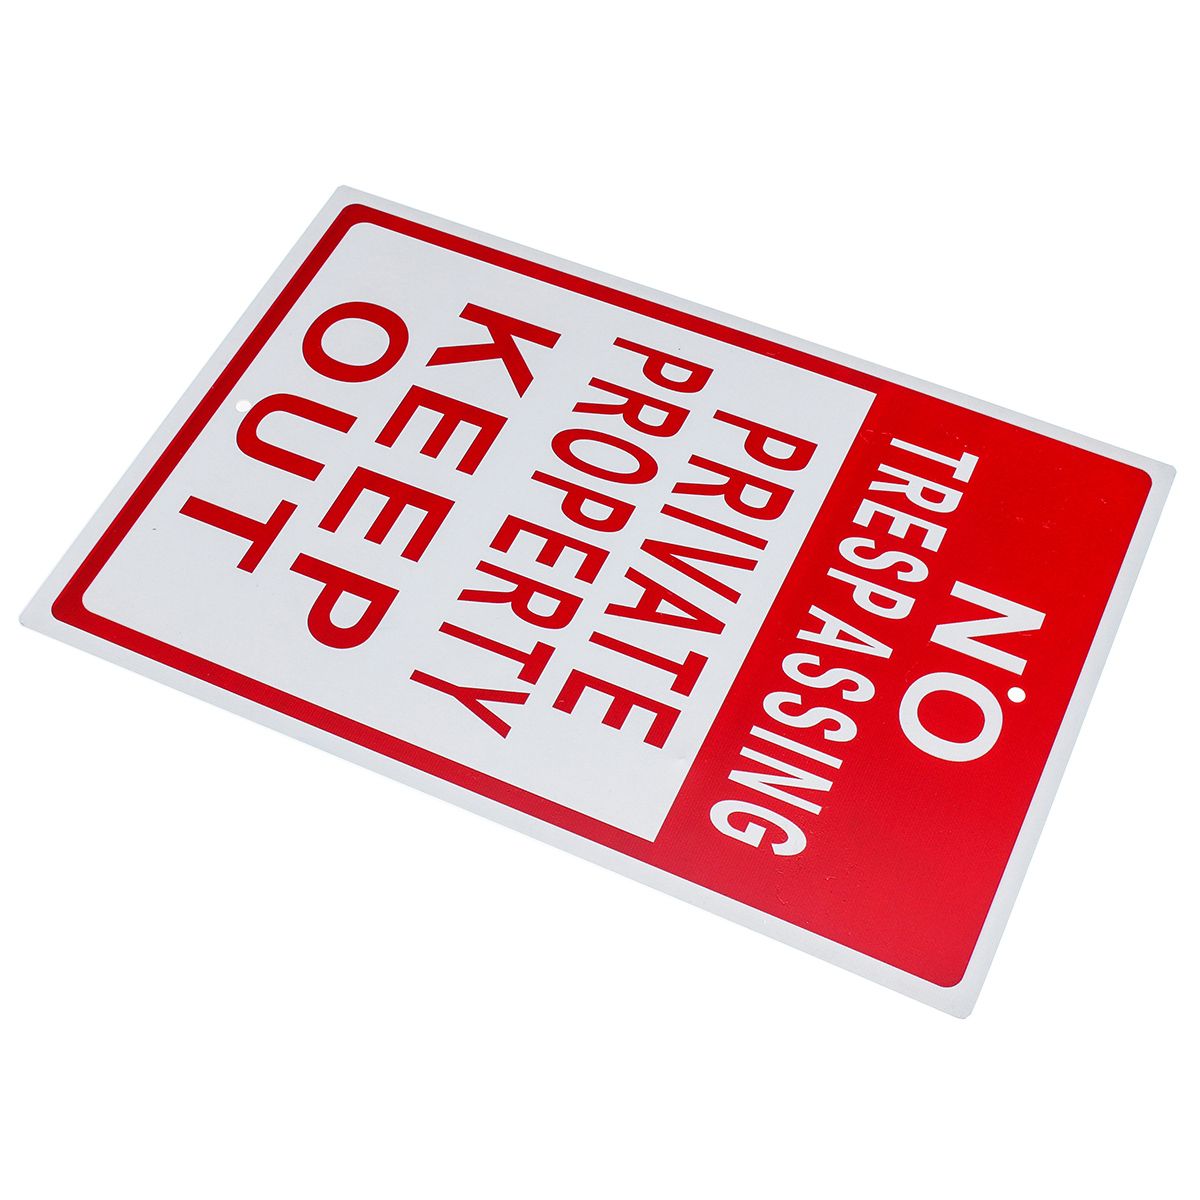 20cmx30cm-Aluminum-No-Trespassing-Private-Property-Keep-Out-Sign-Warning-Sign-1454768